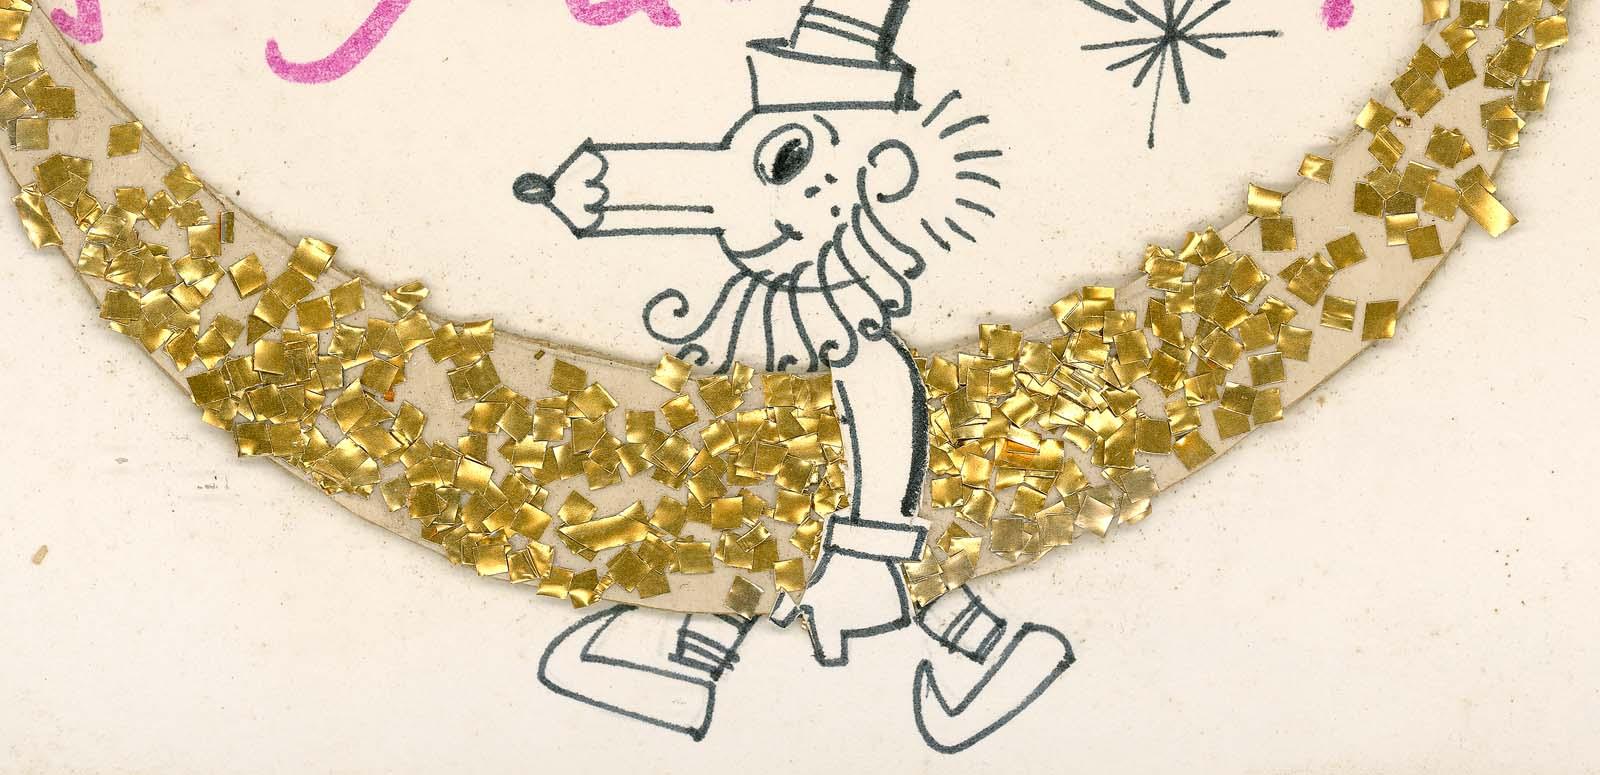 Detail from a hand-drawn Christmas card showing Mr Squiggle carrying a golden glittery moon